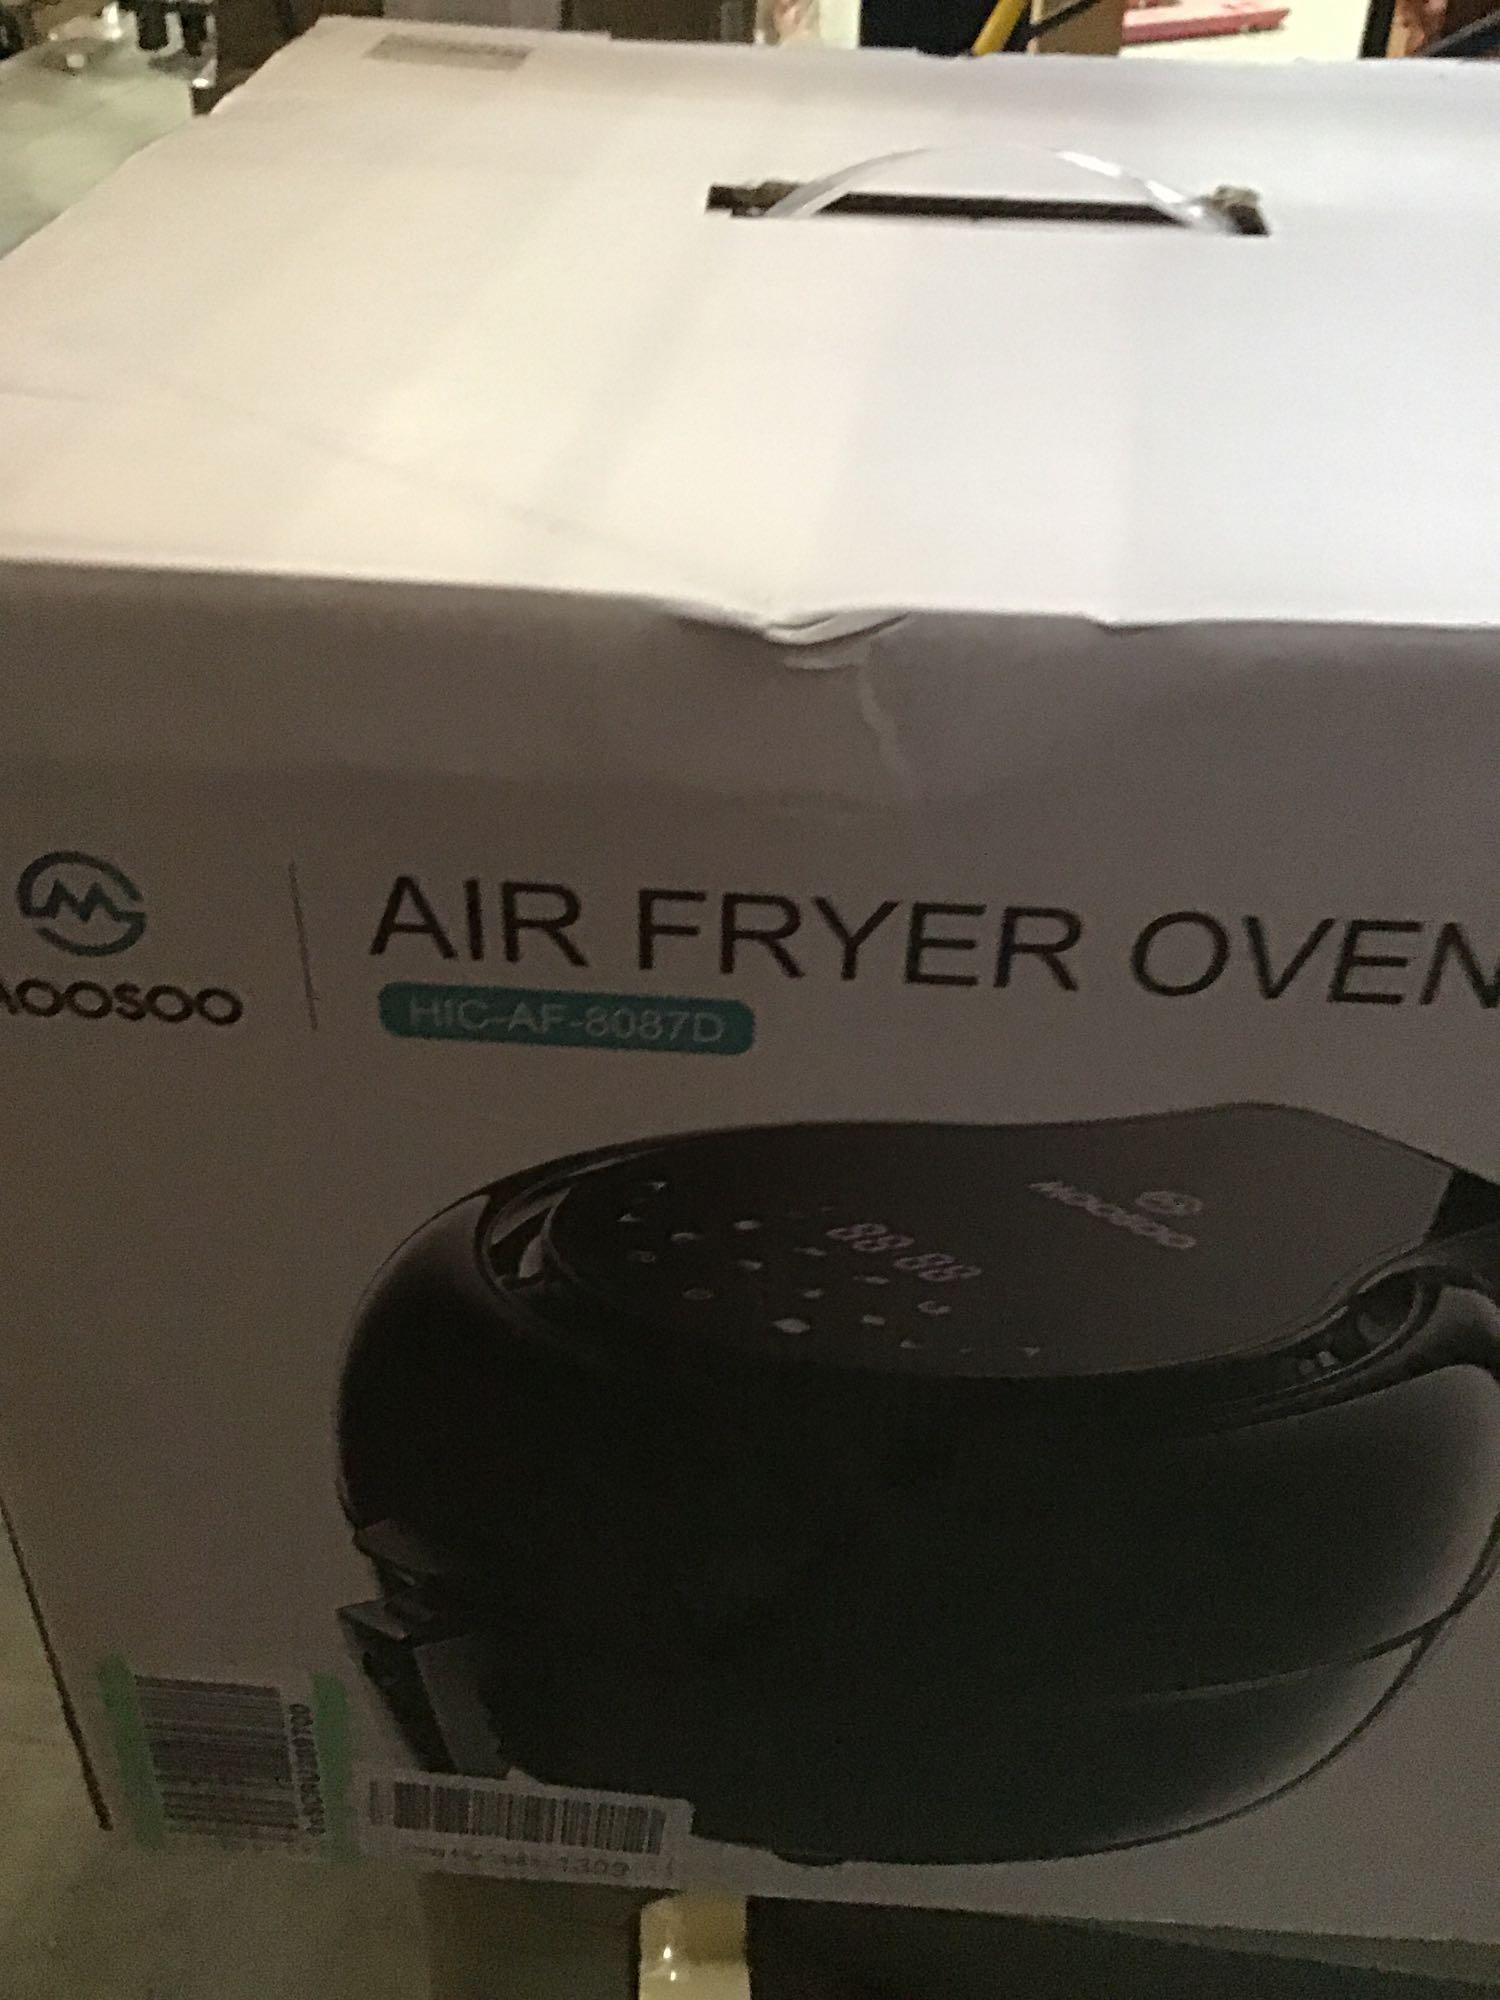 Moosoo MA90 Air Fryer Oven - Roller Auctions